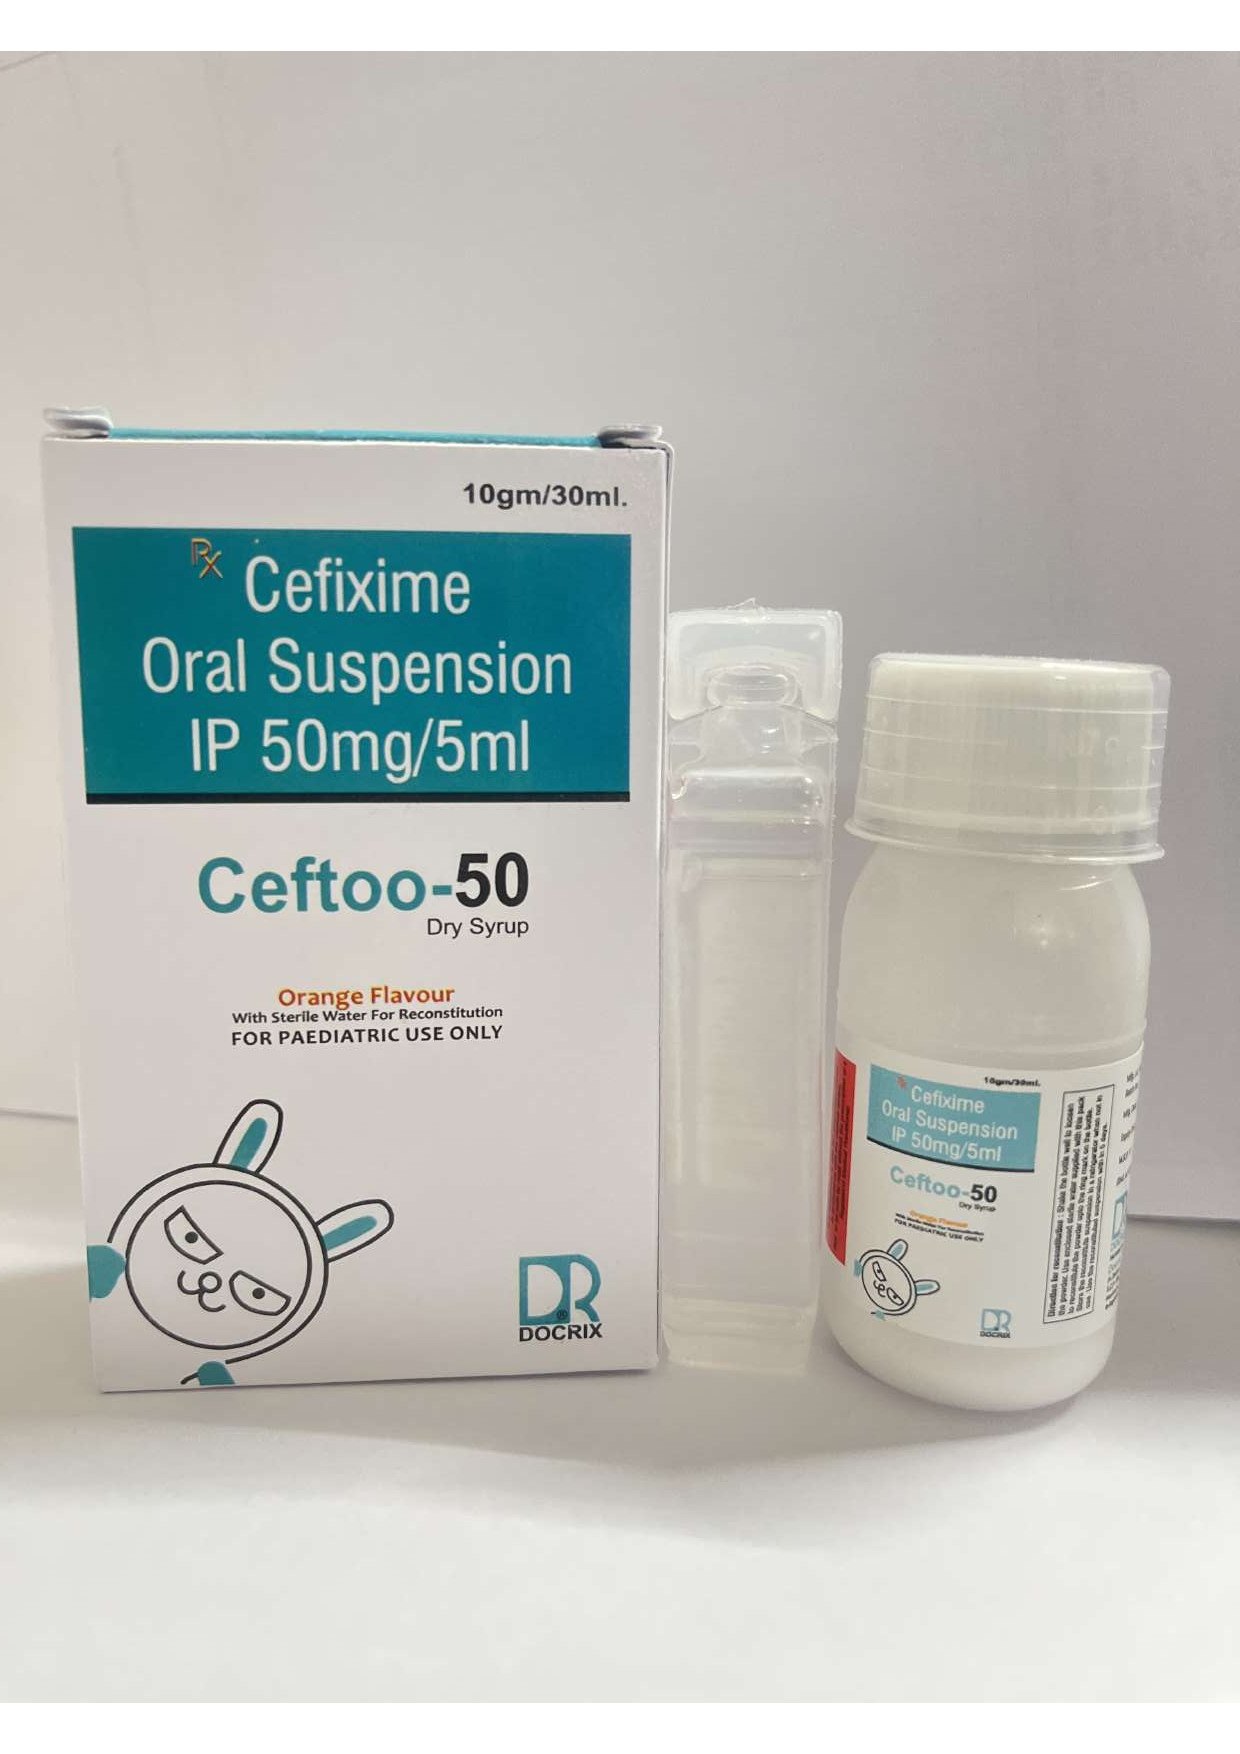 Product Name: Ceftoo 50, Compositions of Ceftoo 50 are Cefixime Oral Suspension IP 50mg/5ml - Docrix Healthcare